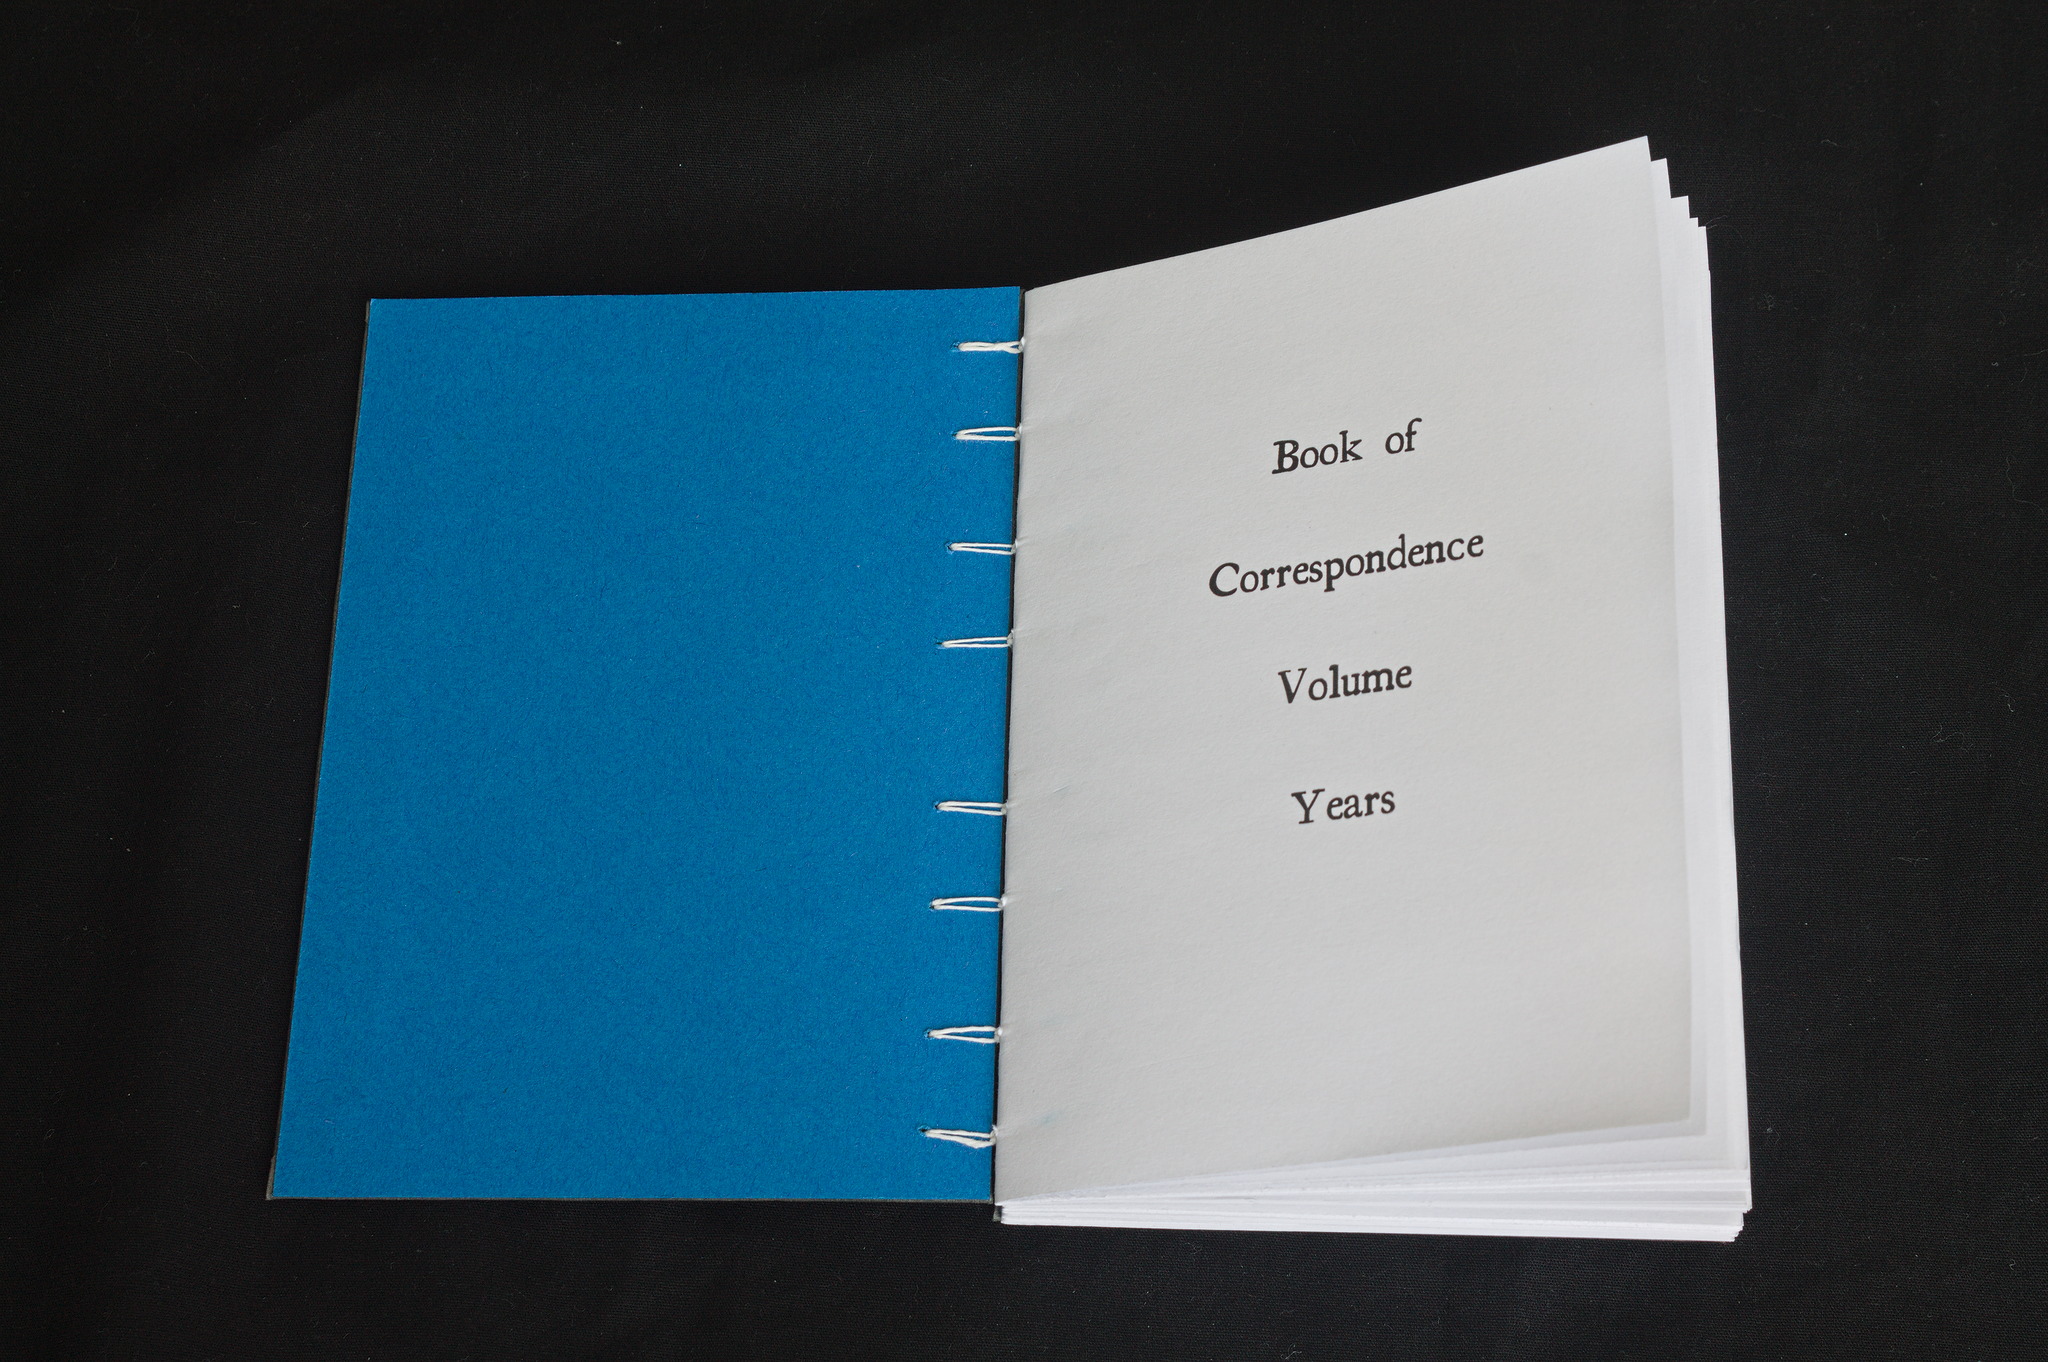 A Coptic bound book open to the first page with the title “Book
of <space> Correspondence / Volume <space> Years <space>”